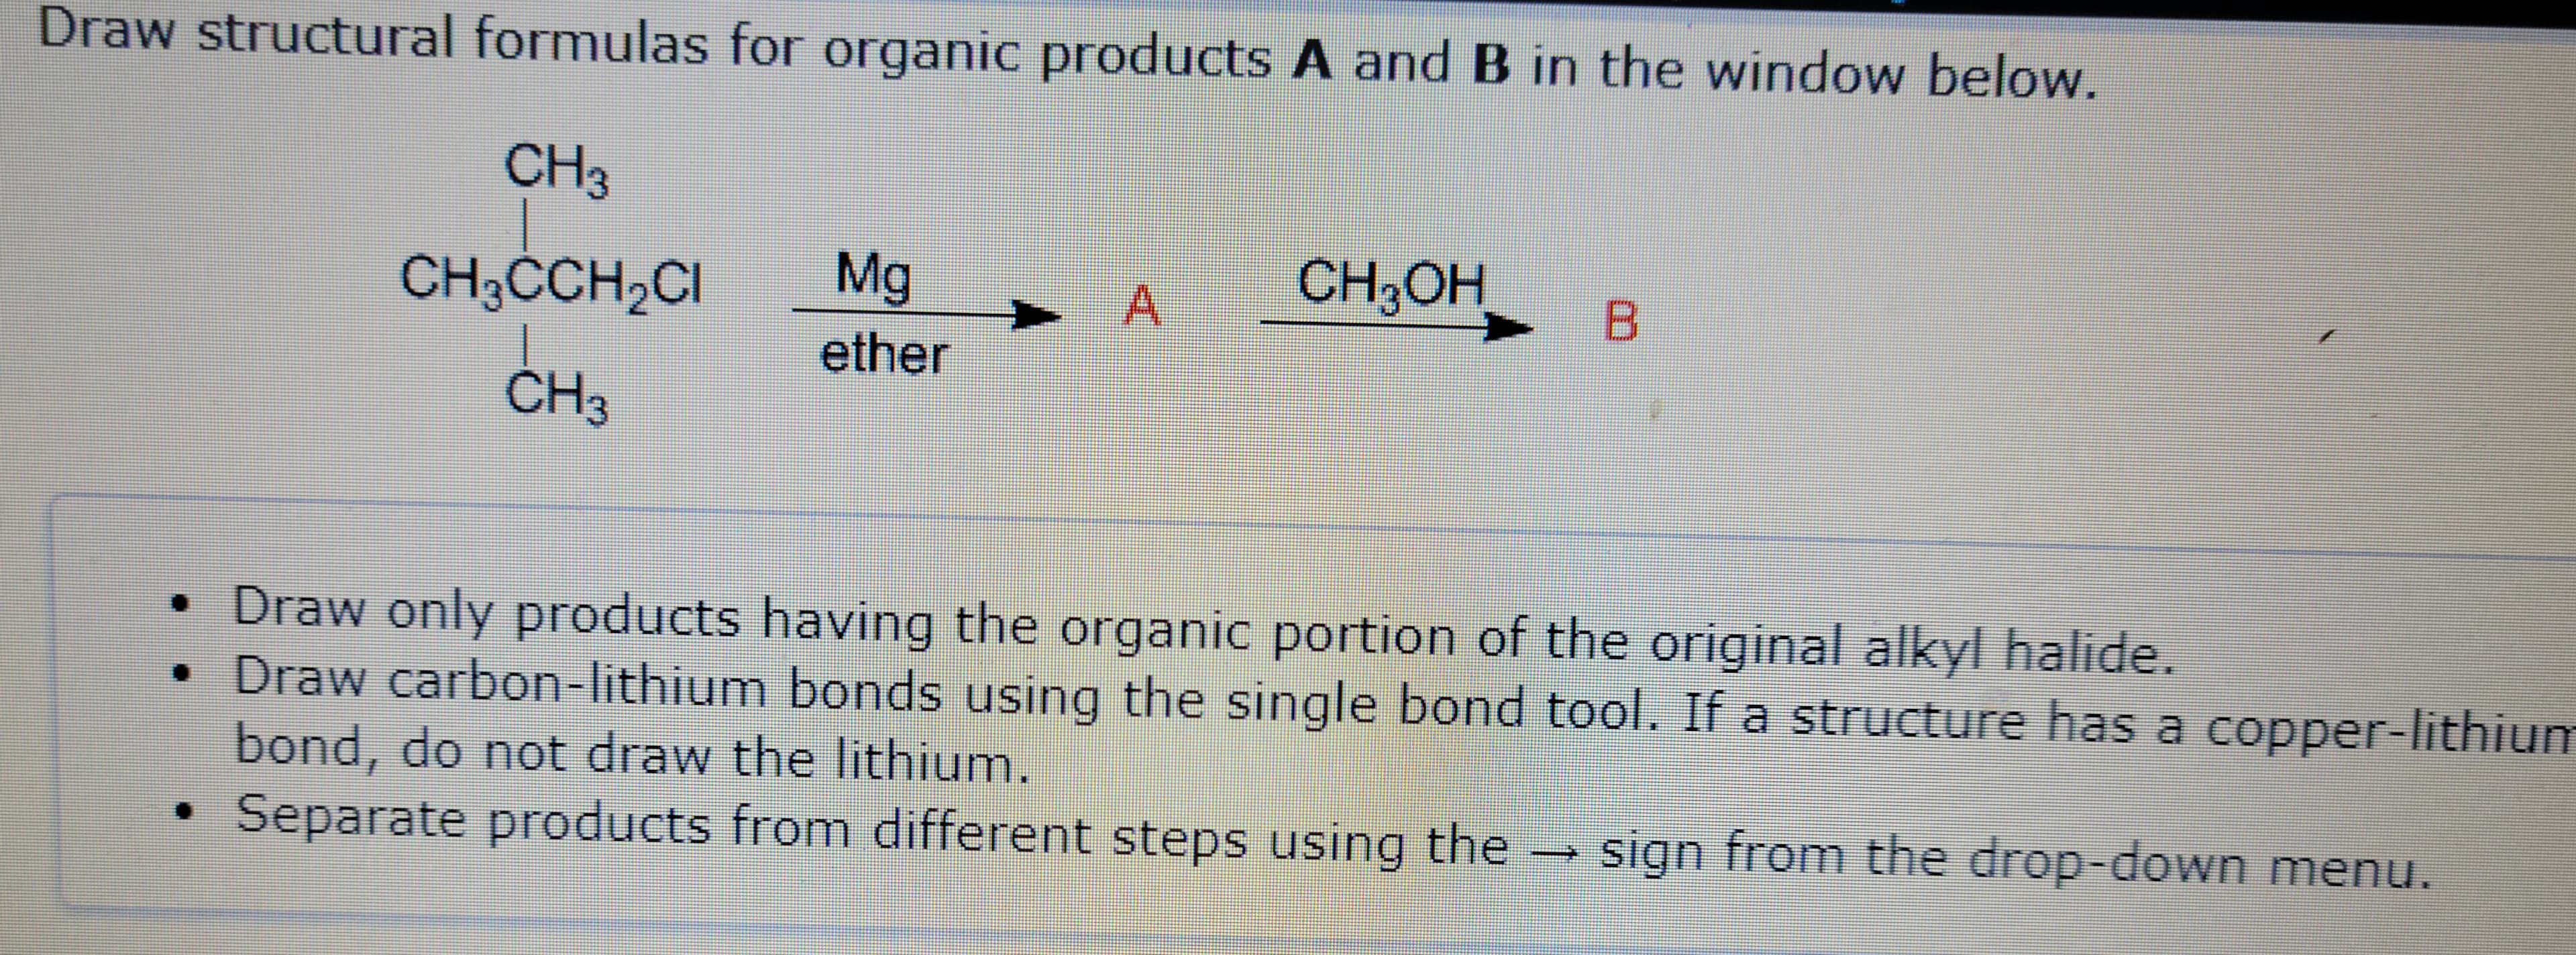 Draw structural formulas for organic products A and B in the window below.
CH3
CH3CCH₂CI
_
CH3
Mg
ether
A
A
CH3OH
B
• Draw only products having the organic portion of the original alkyl halide.
• Draw carbon-lithium bonds using the single bond tool. If a structure has a copper-lithium
bond, do not draw the lithium.
Separate products from different steps using the
1
sign from the drop-down menu.